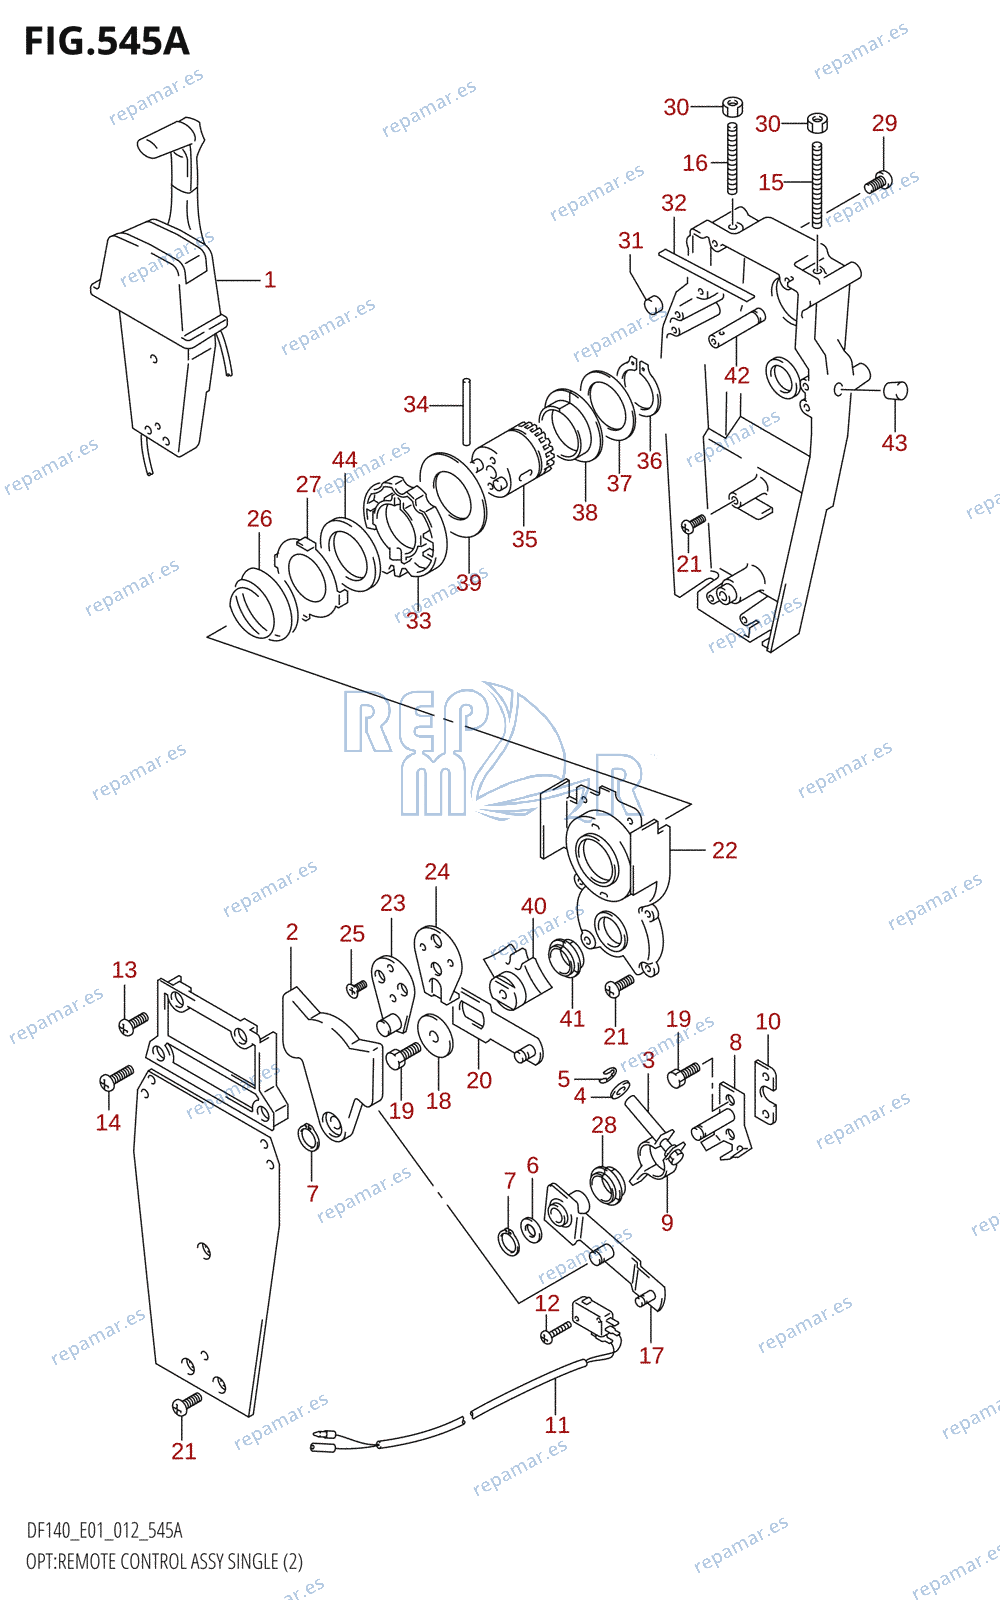 545A - OPT:REMOTE CONTROL ASSY SINGLE (2)